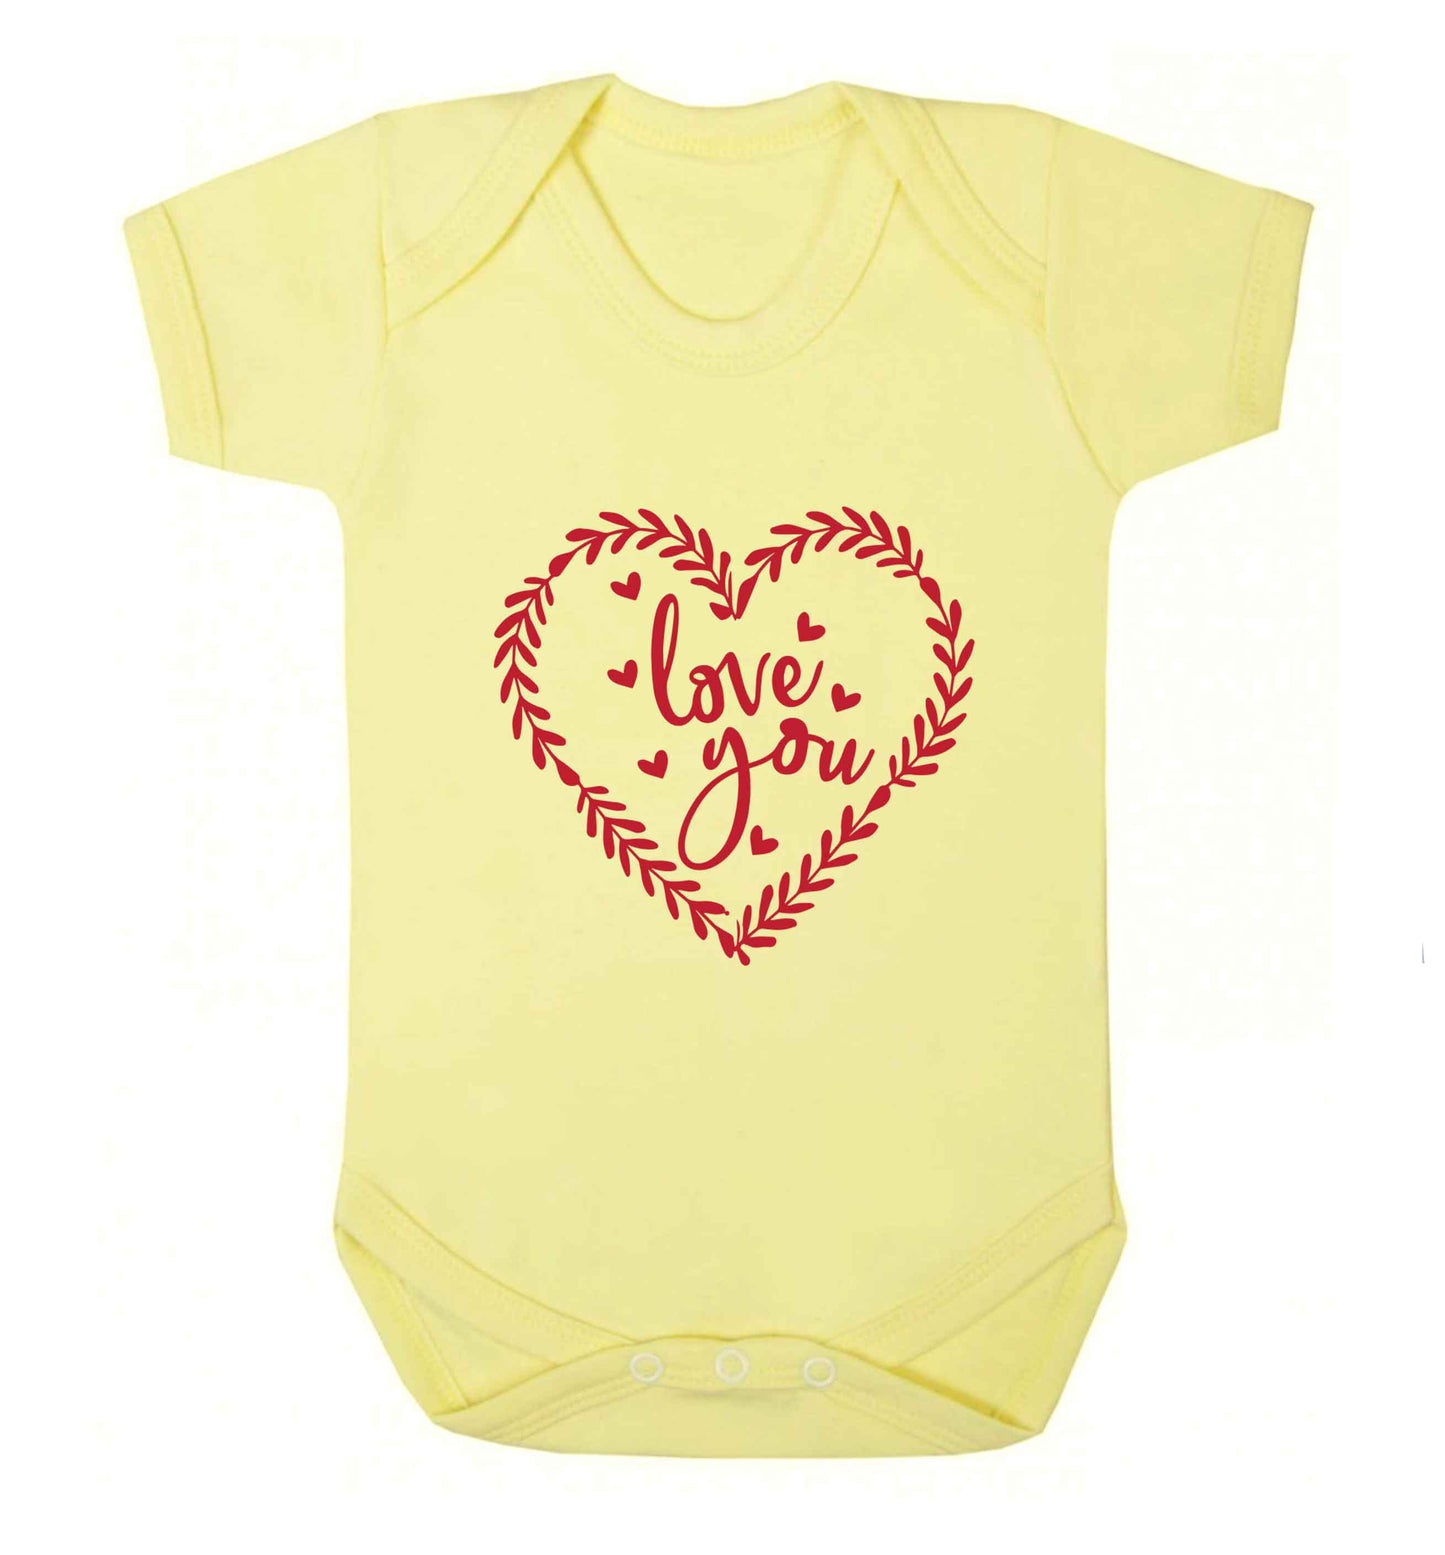 Love you baby vest pale yellow 18-24 months